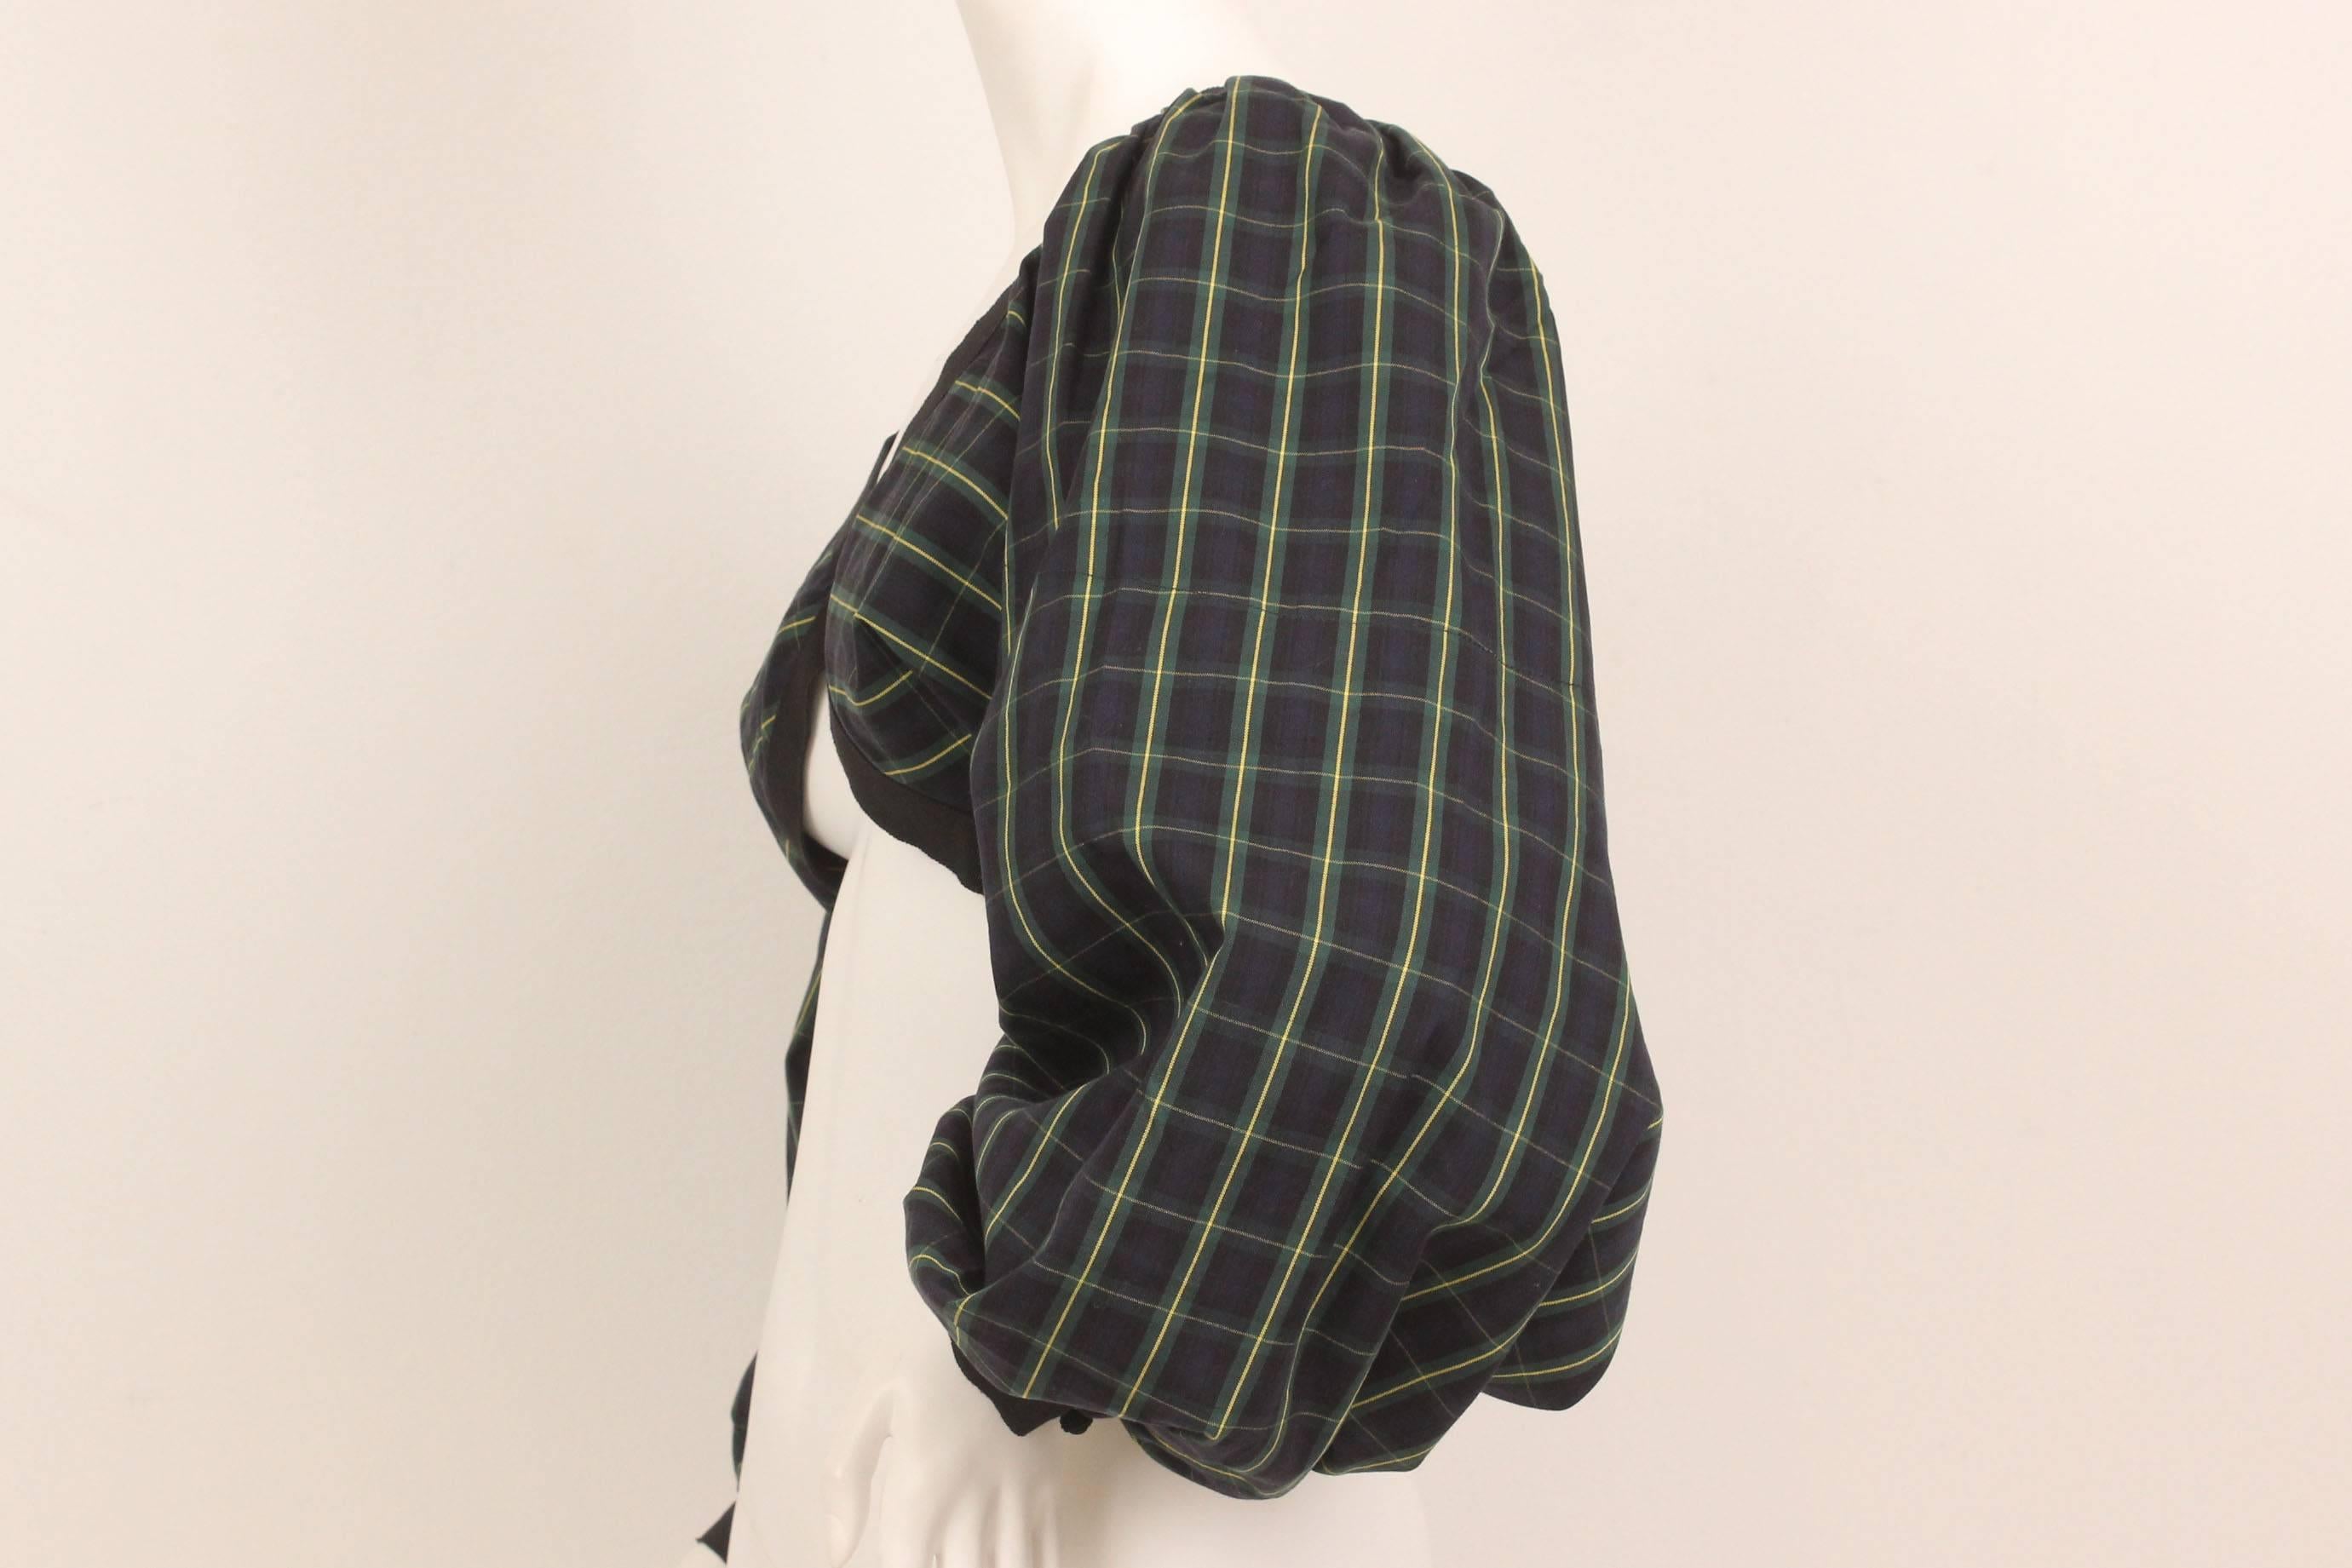 Truly a piece of design ingenuity, this crop top is all about its fabulous sleeves. Fastens with a hook at the center back and snaps at both wrists. The plaid is a navy with green and yellow stripe and black grosgrain ribbon trim. Would be stunning